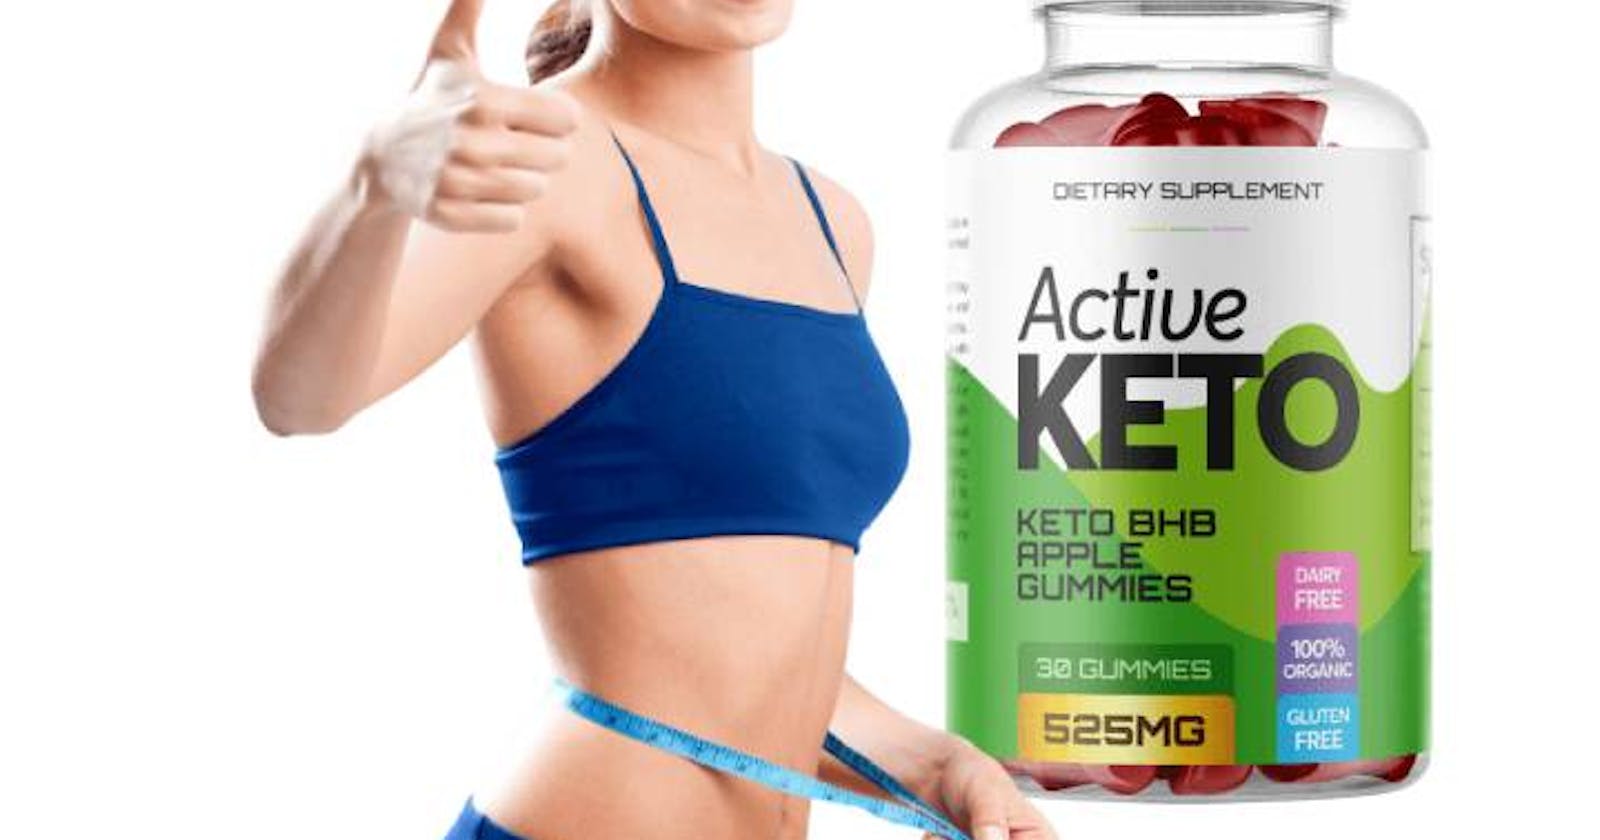 The Ultimate Guide to Kelly Clarkson's Keto Gummies for Weight Loss